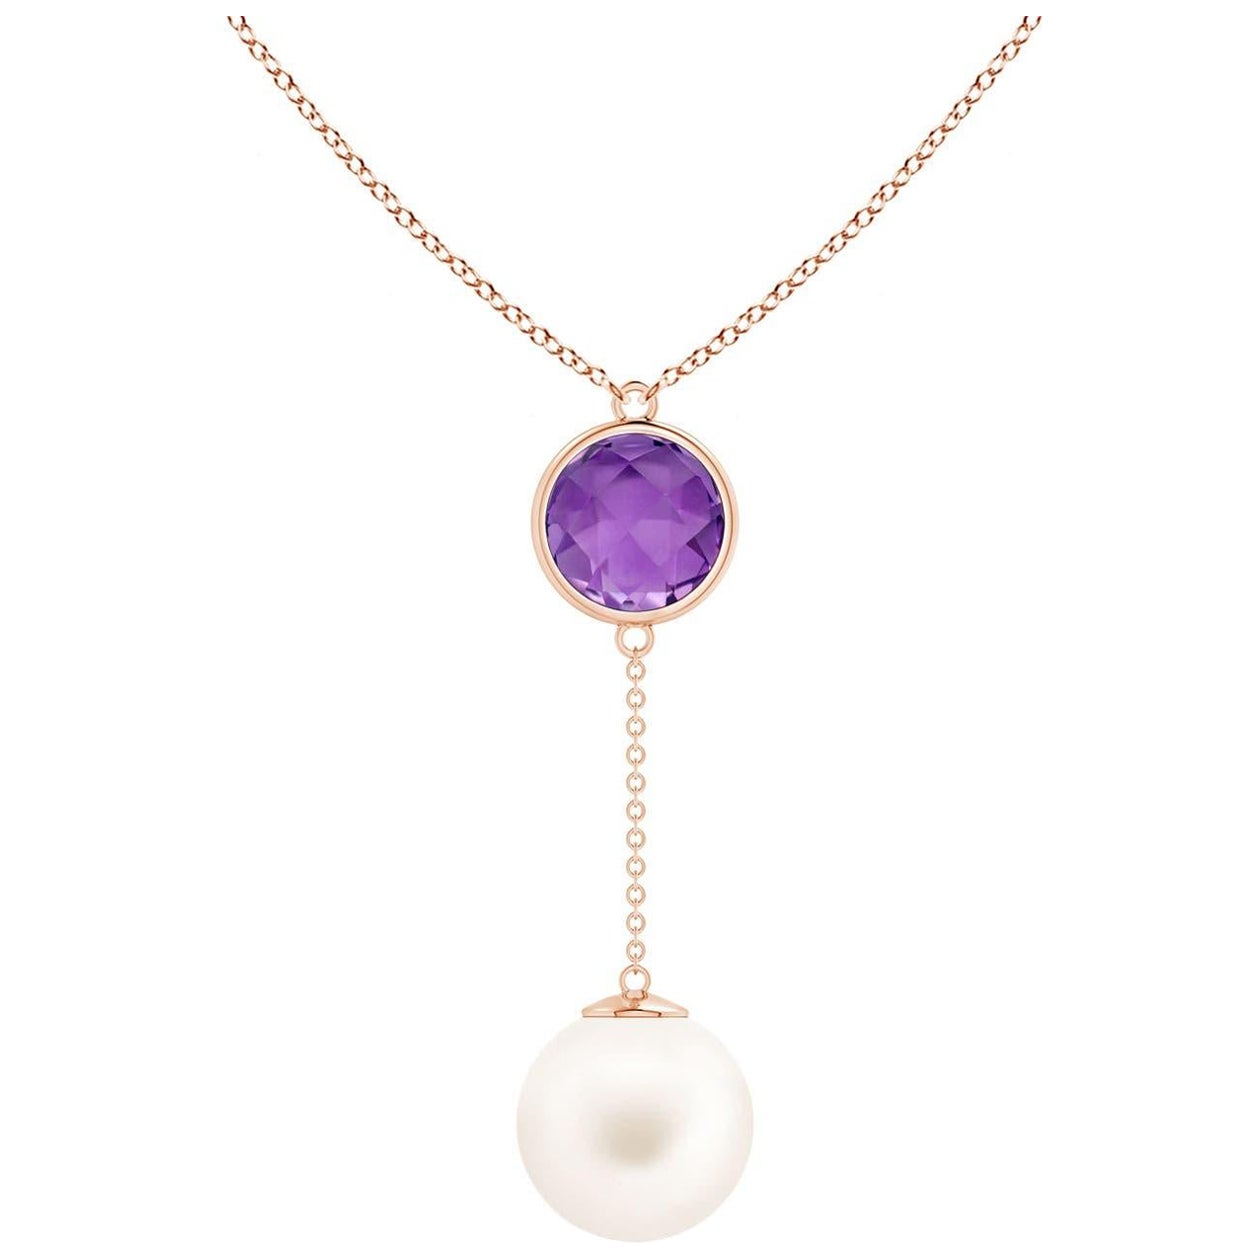 Freshwater Cultured Pearl & 2.85ct Amethyst Lariat Necklace in 14K Rose Gold For Sale